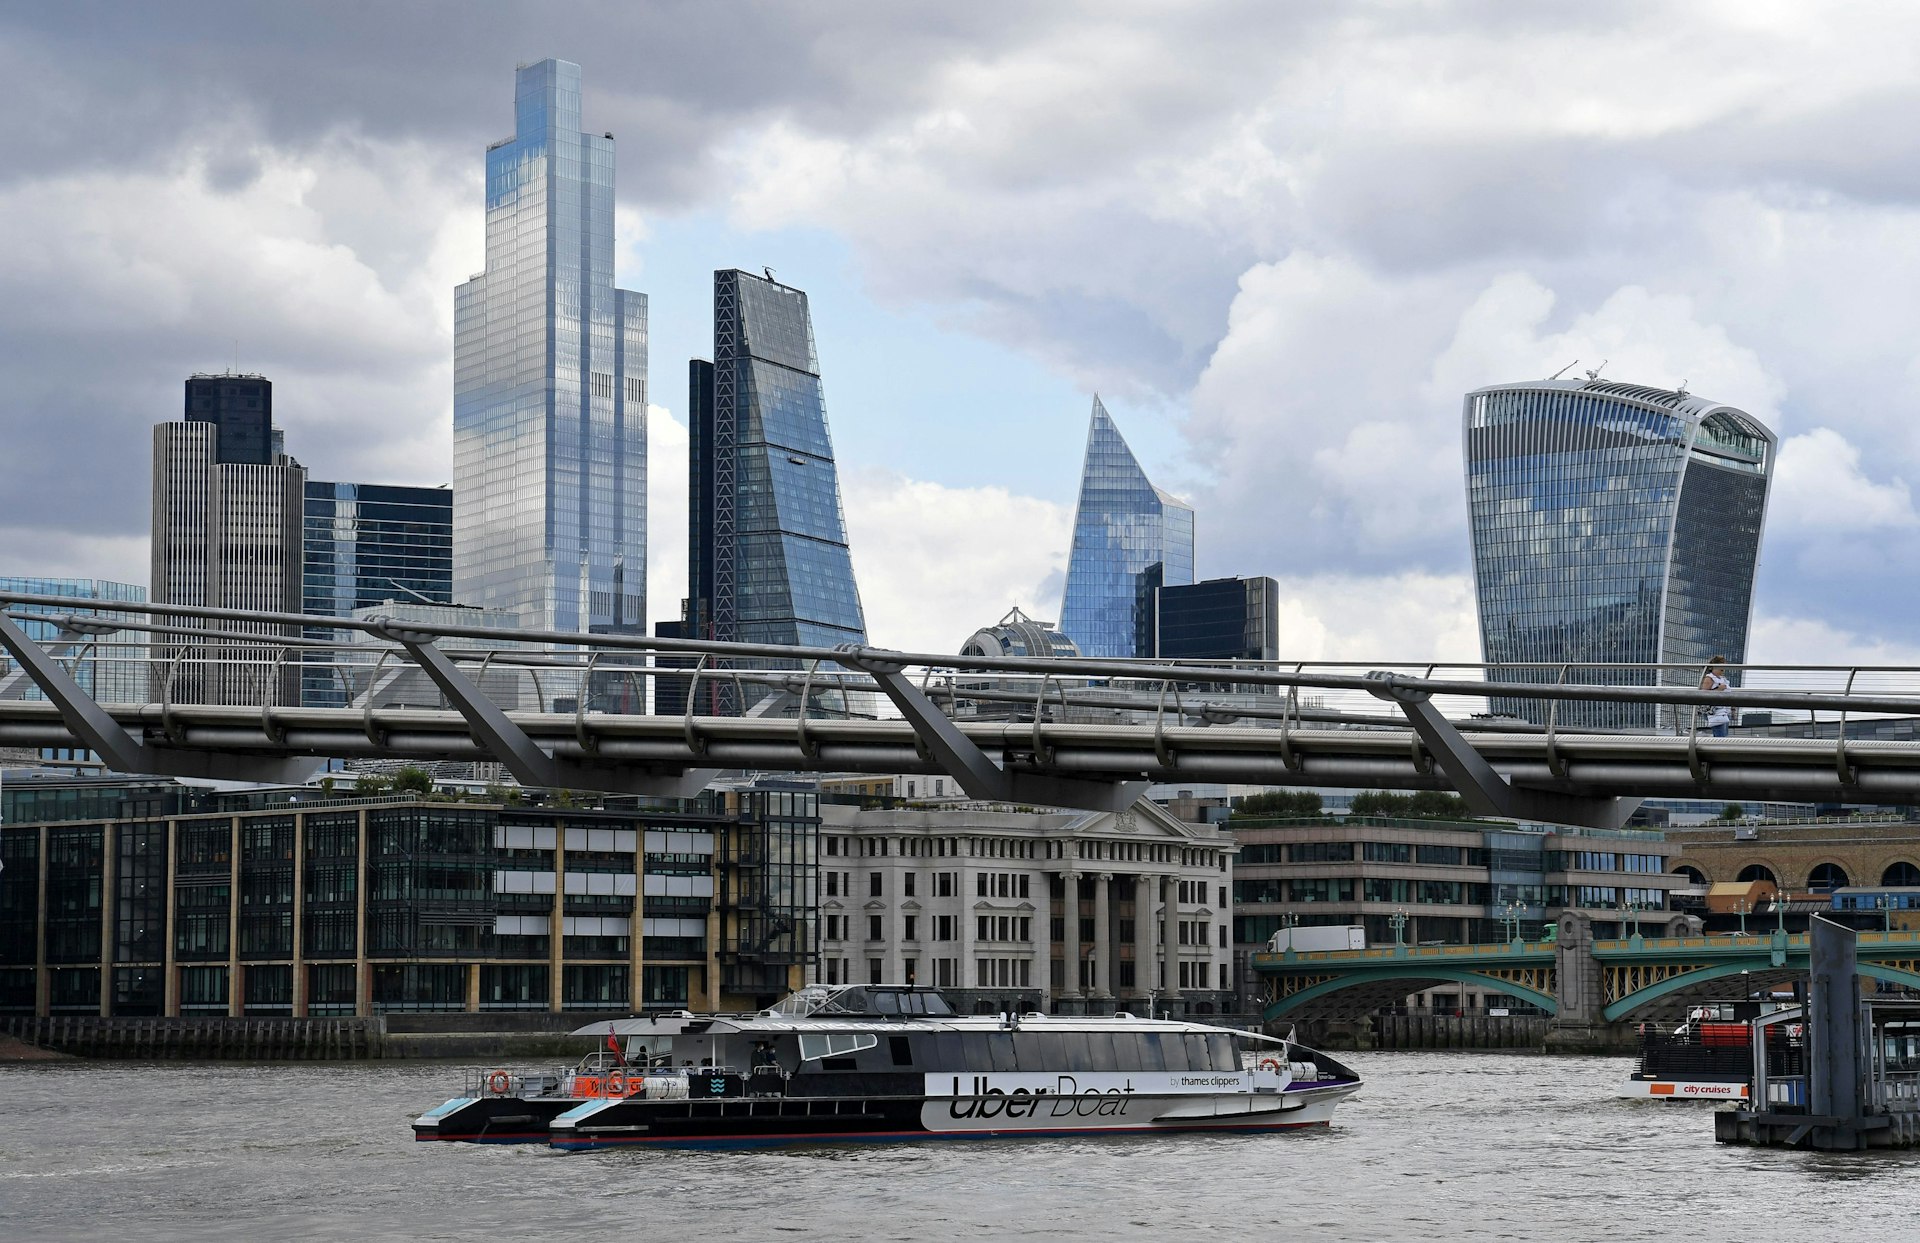 An Uber Boat river bus services crosses through the Thames in central London